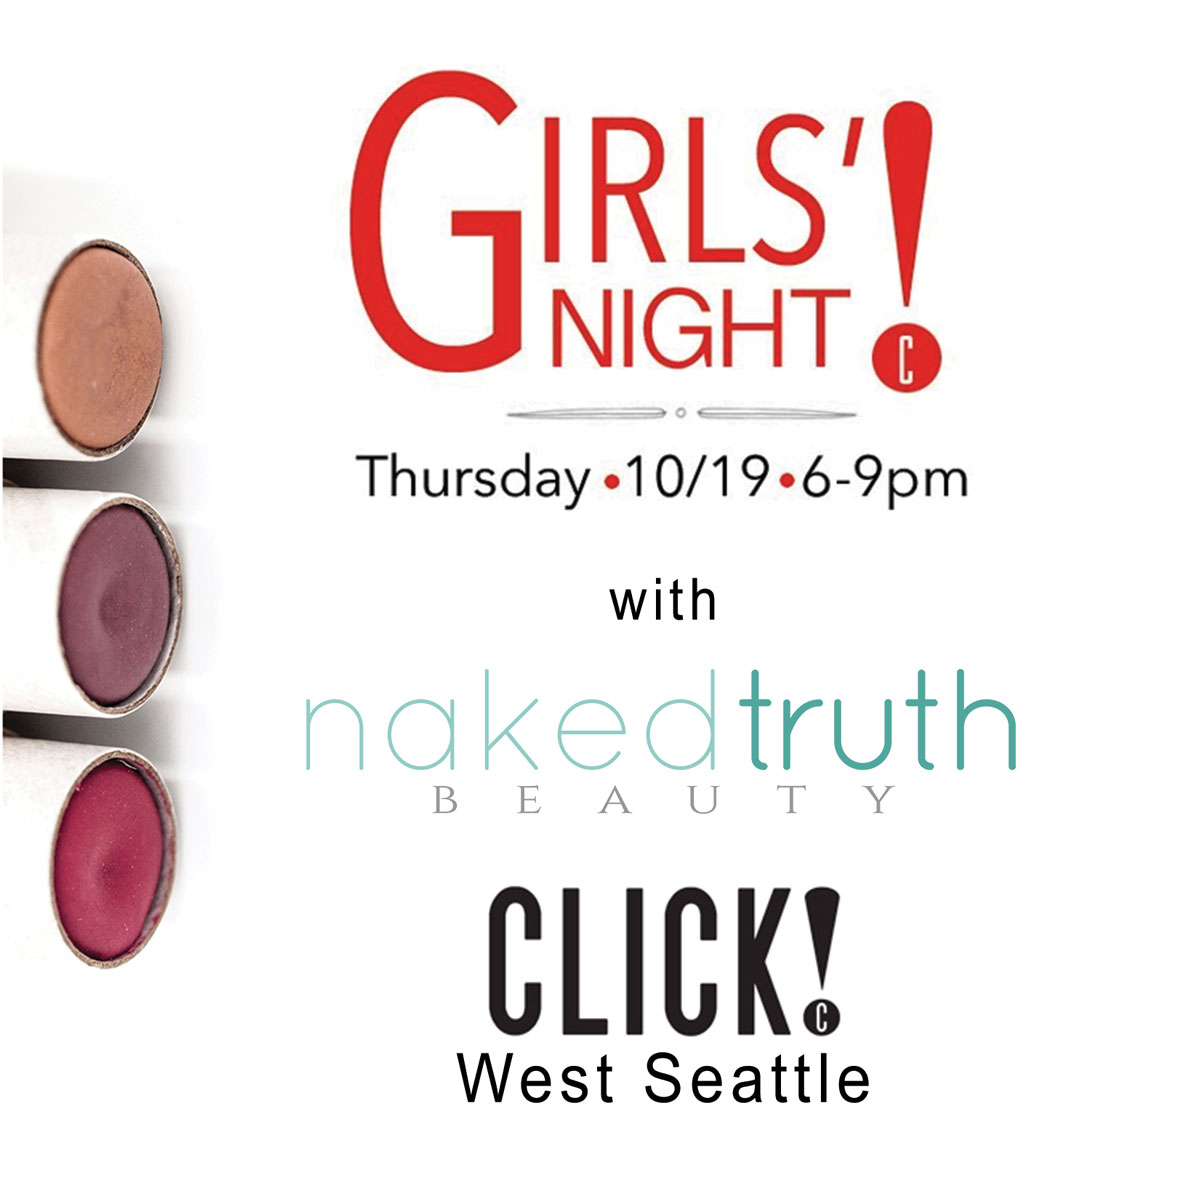 Girls' Night at Click! Design That Fits West Seattle